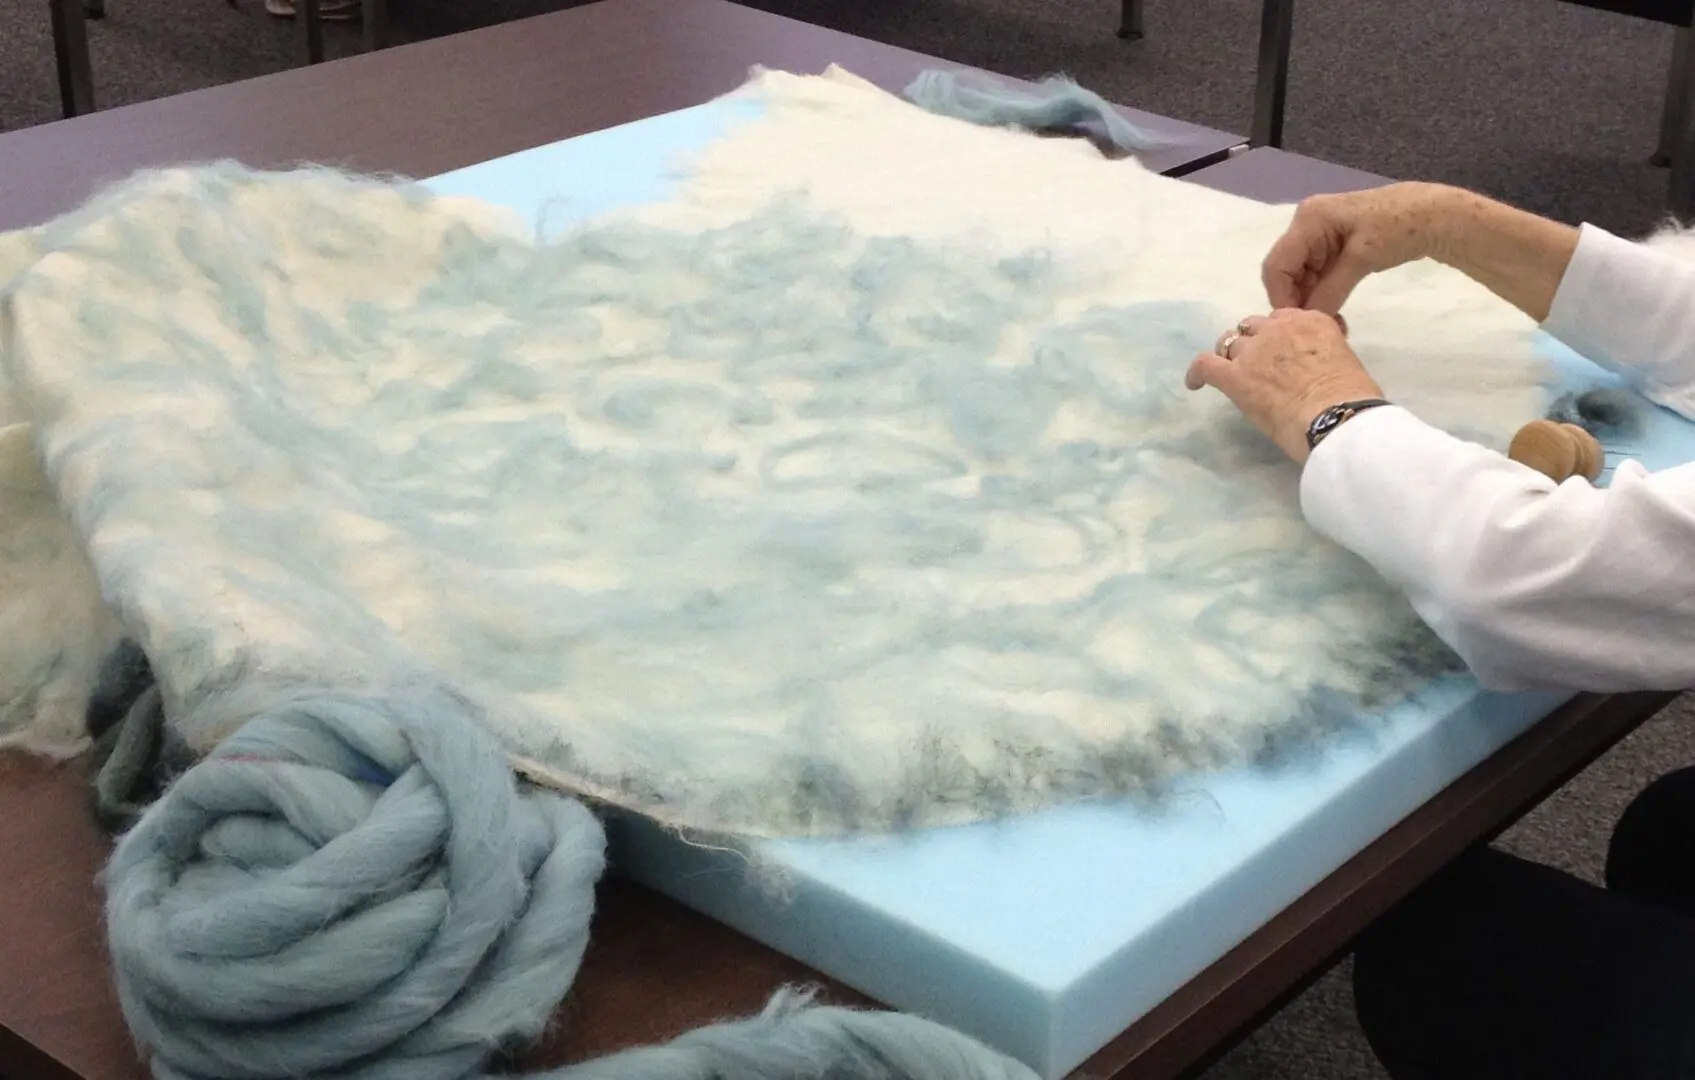 A person is working on a fur rug.